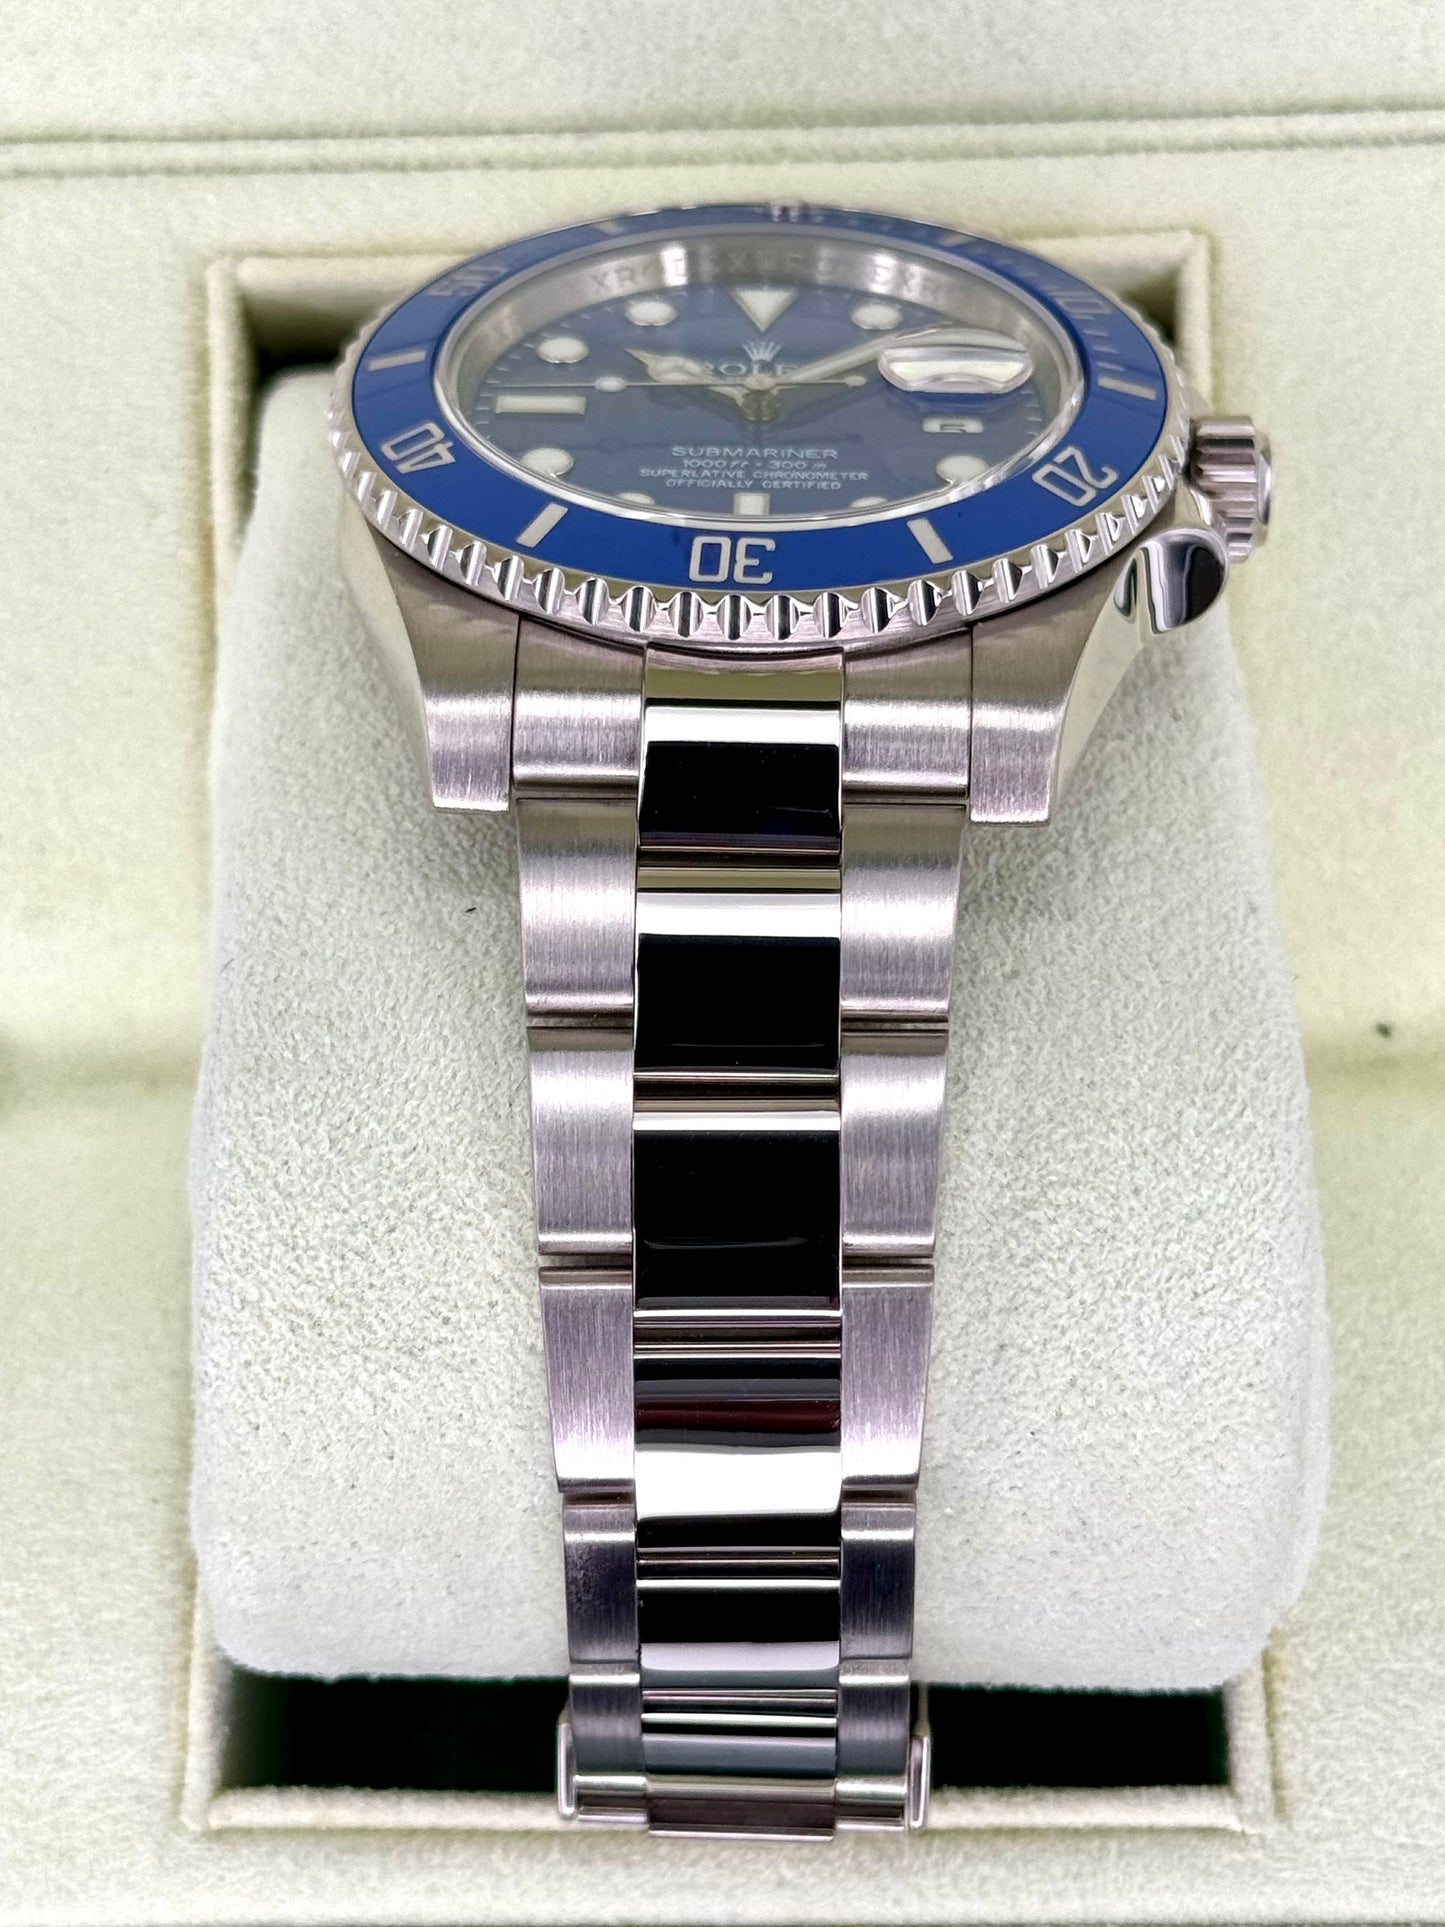 2013 Rolex Submariner Date "Smurf" 40mm 116619LB White Gold Blue Dial - MyWatchLLC